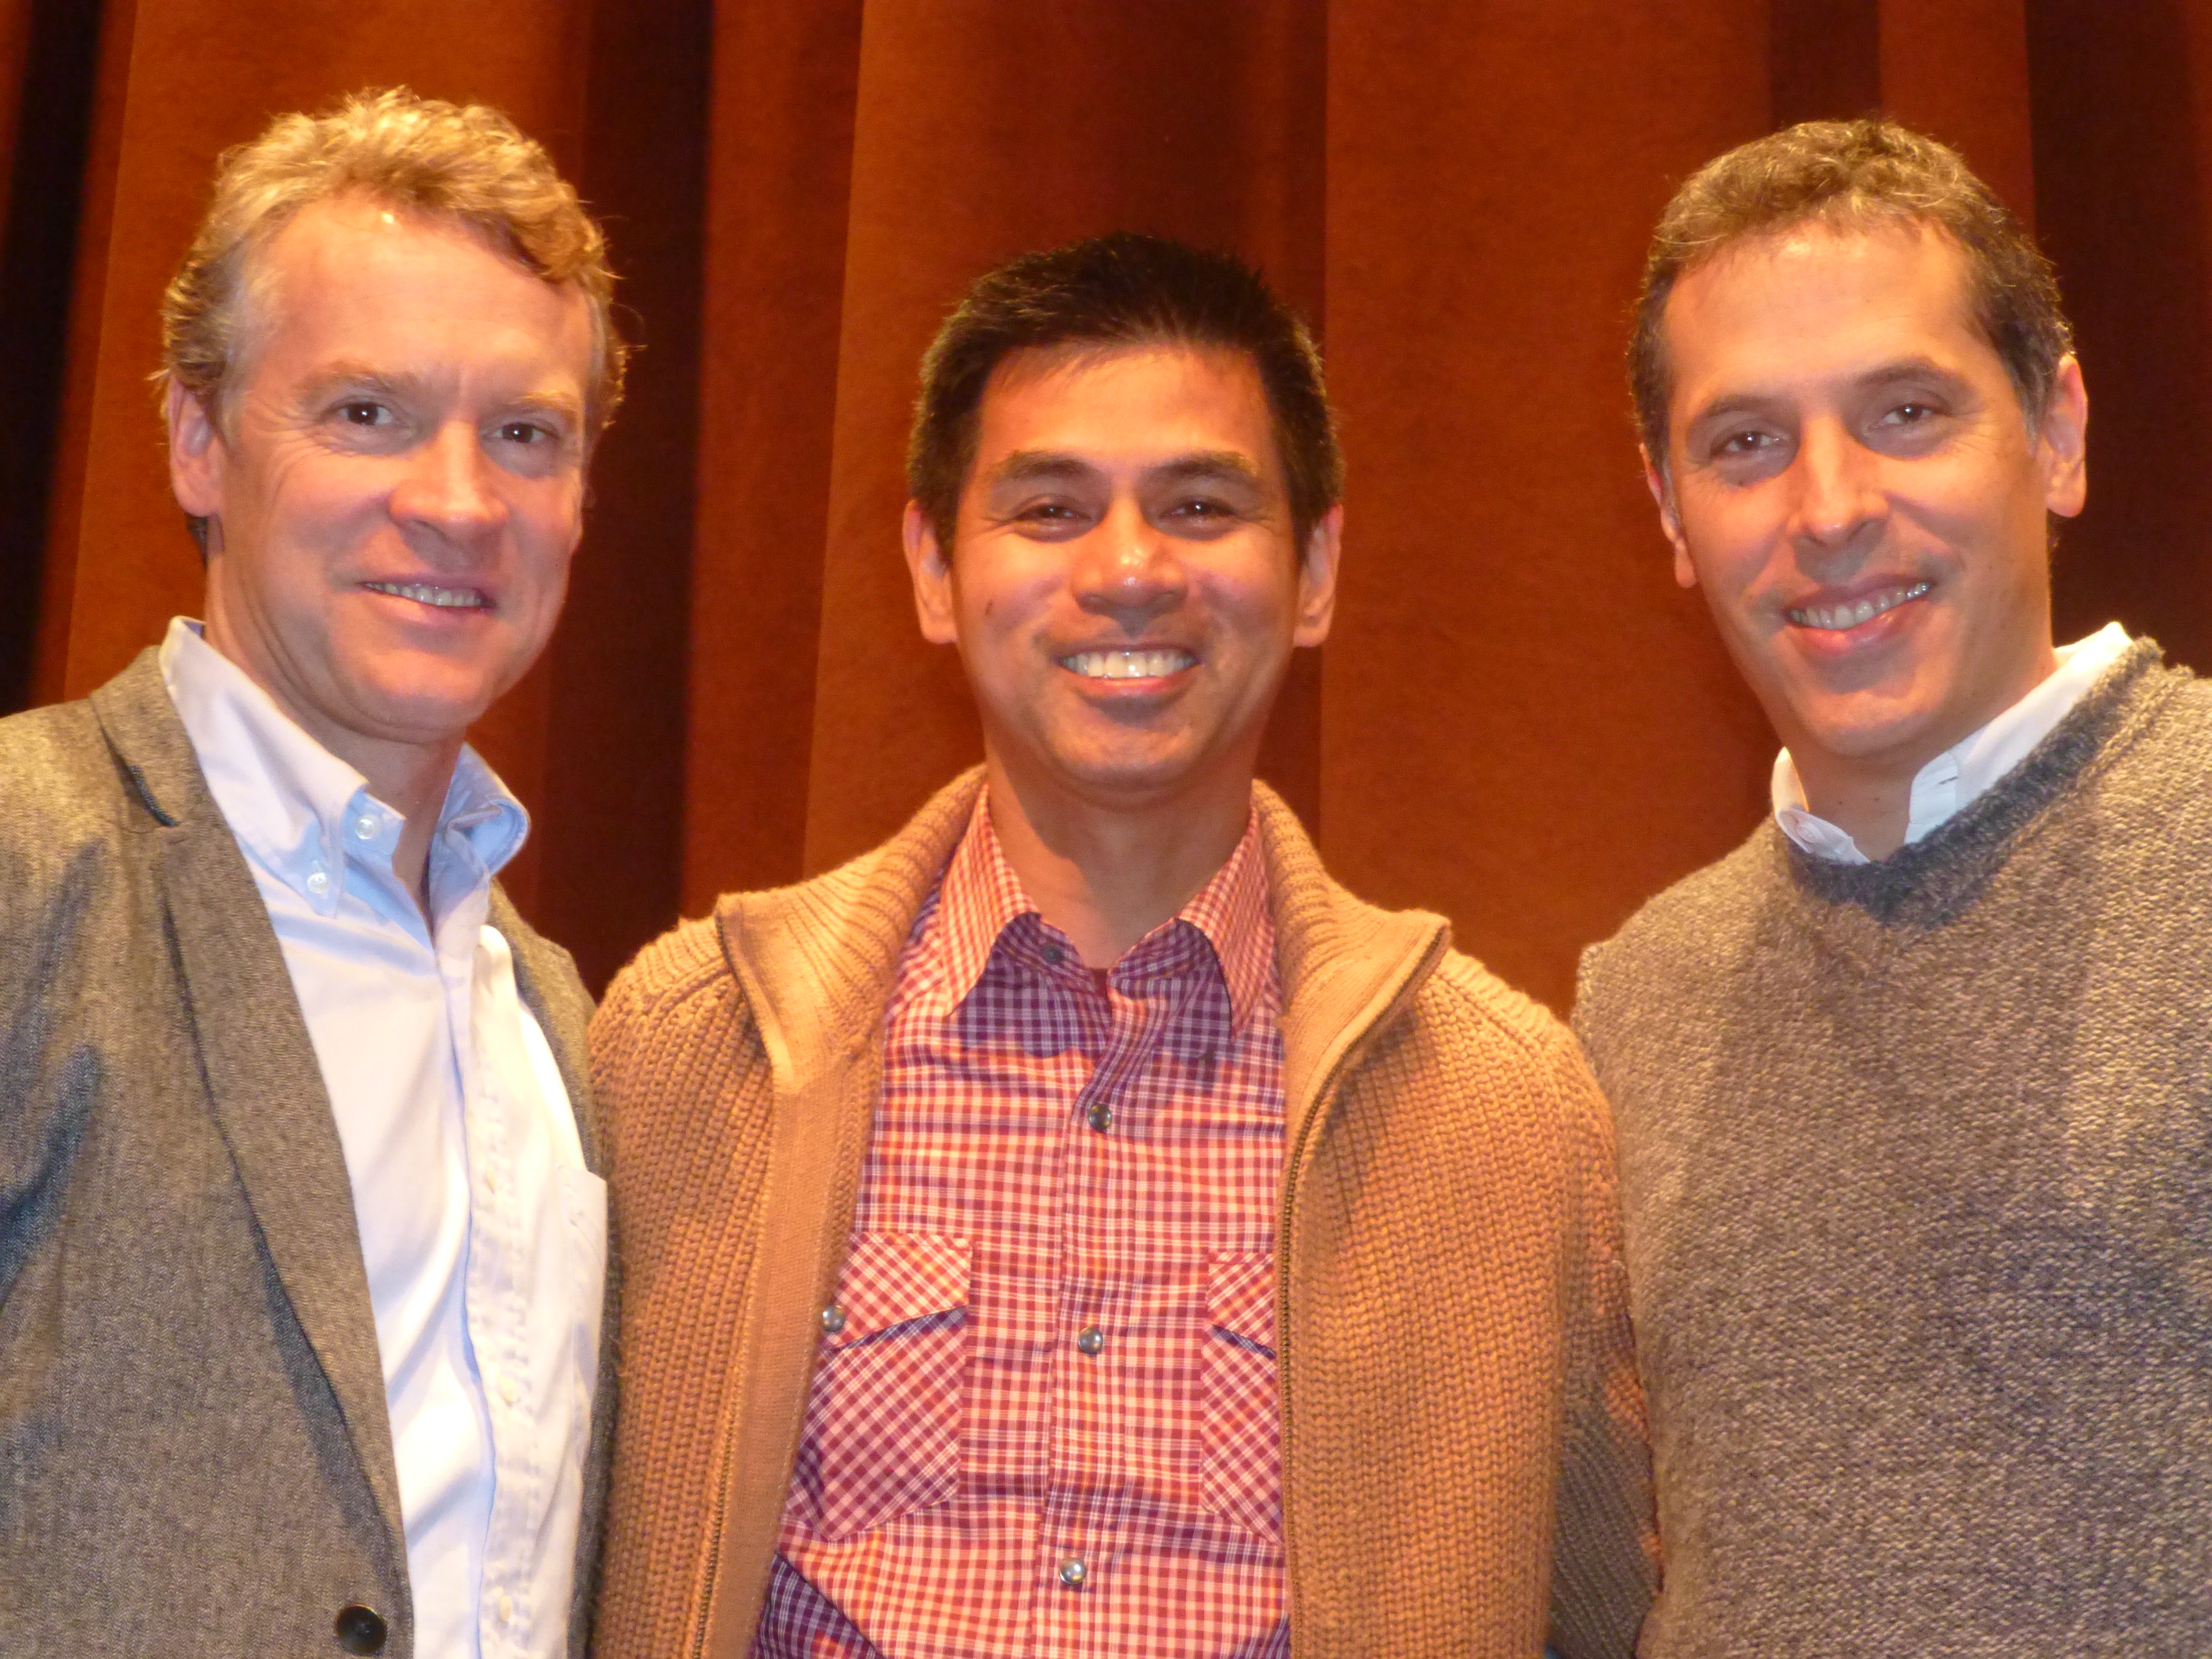 Tate Donovan who plays Bob Anders and cinematographer Rodrigo Prieto after screening of Argo which won Oscar for Best Picture